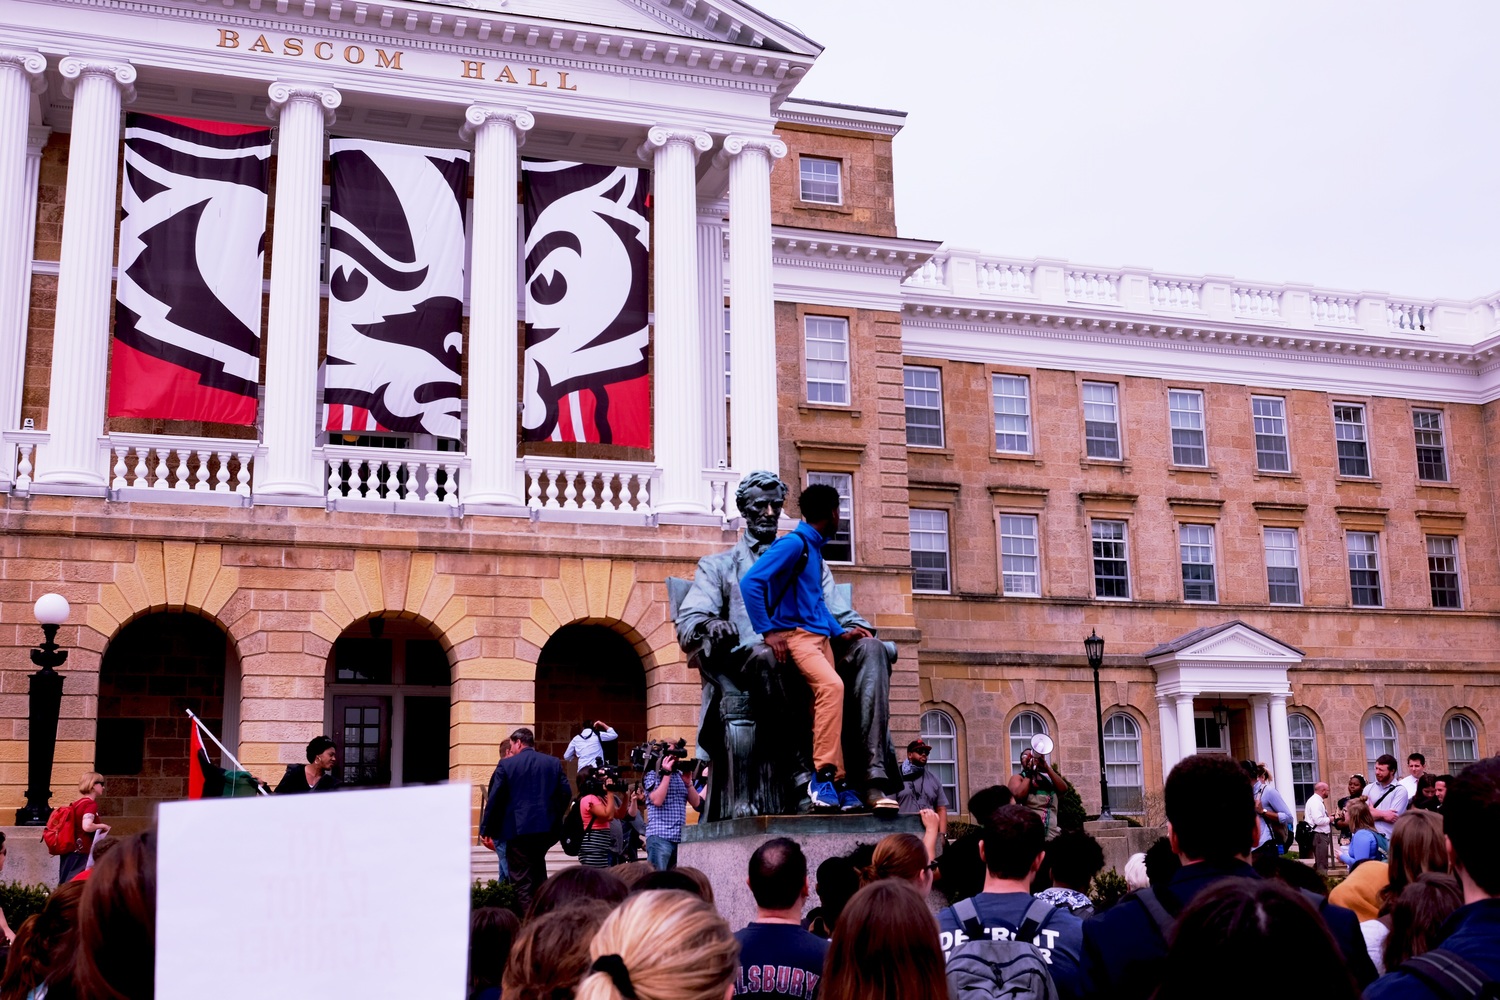 Students gathered at the Abe Lincoln statue on Bascom Mall listen to one of the organizers of the demonstration.